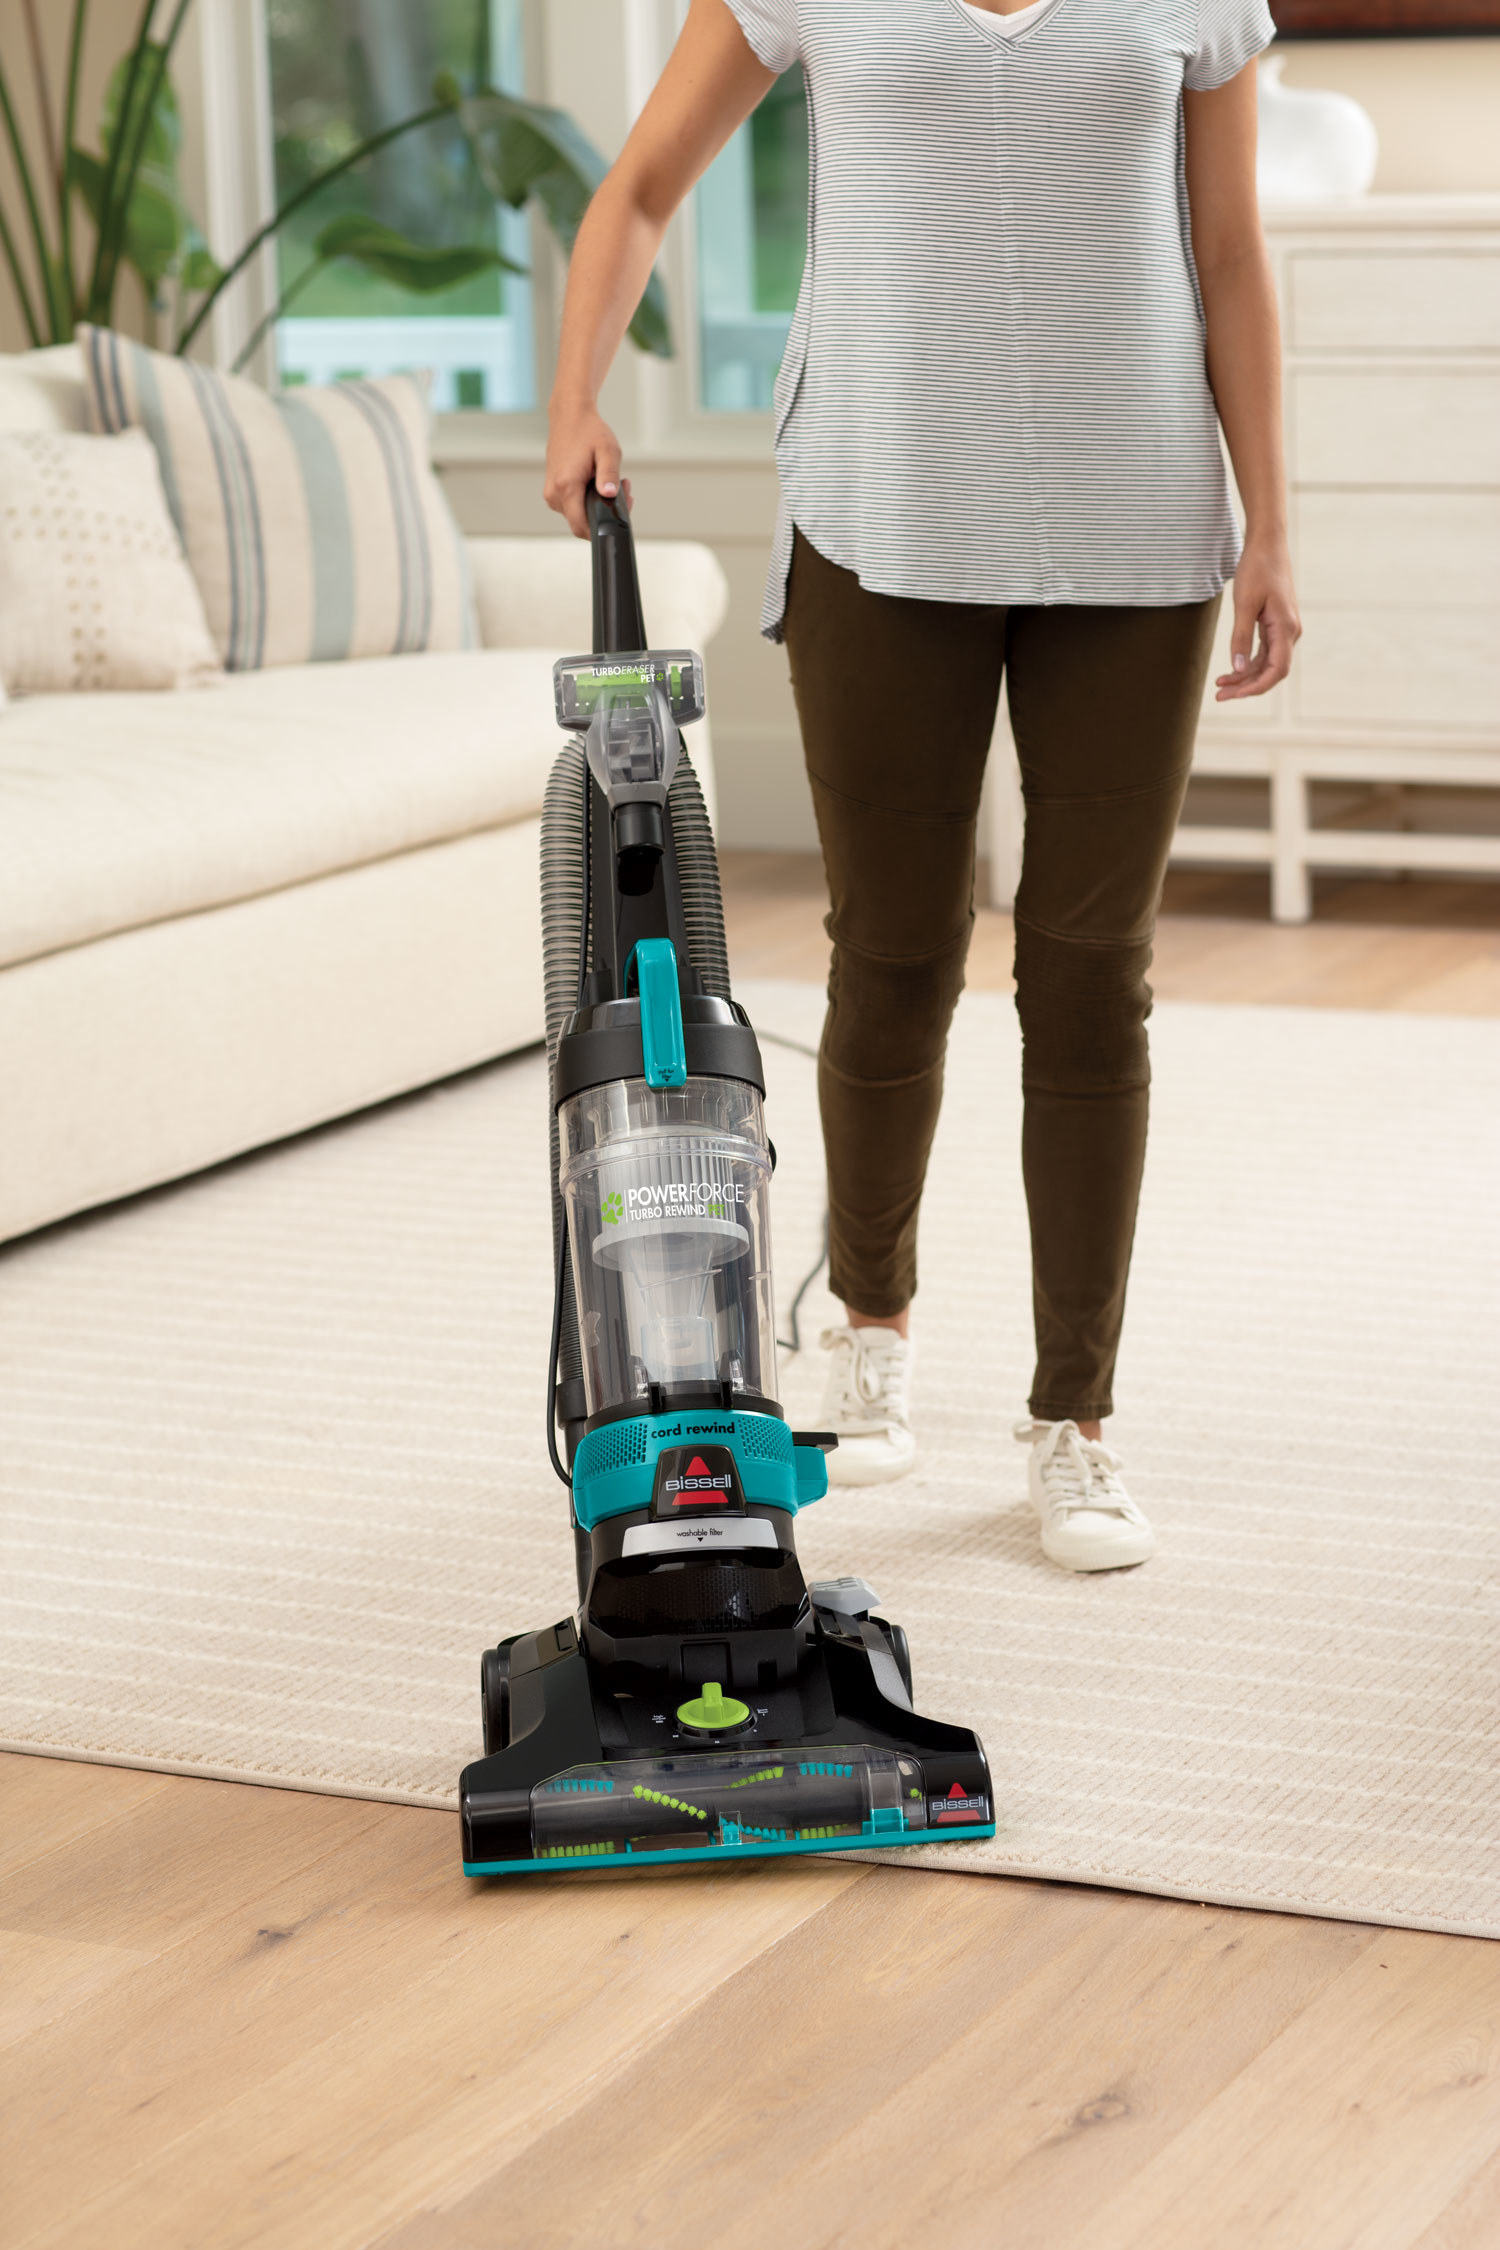 A model using the vacuum on a rug